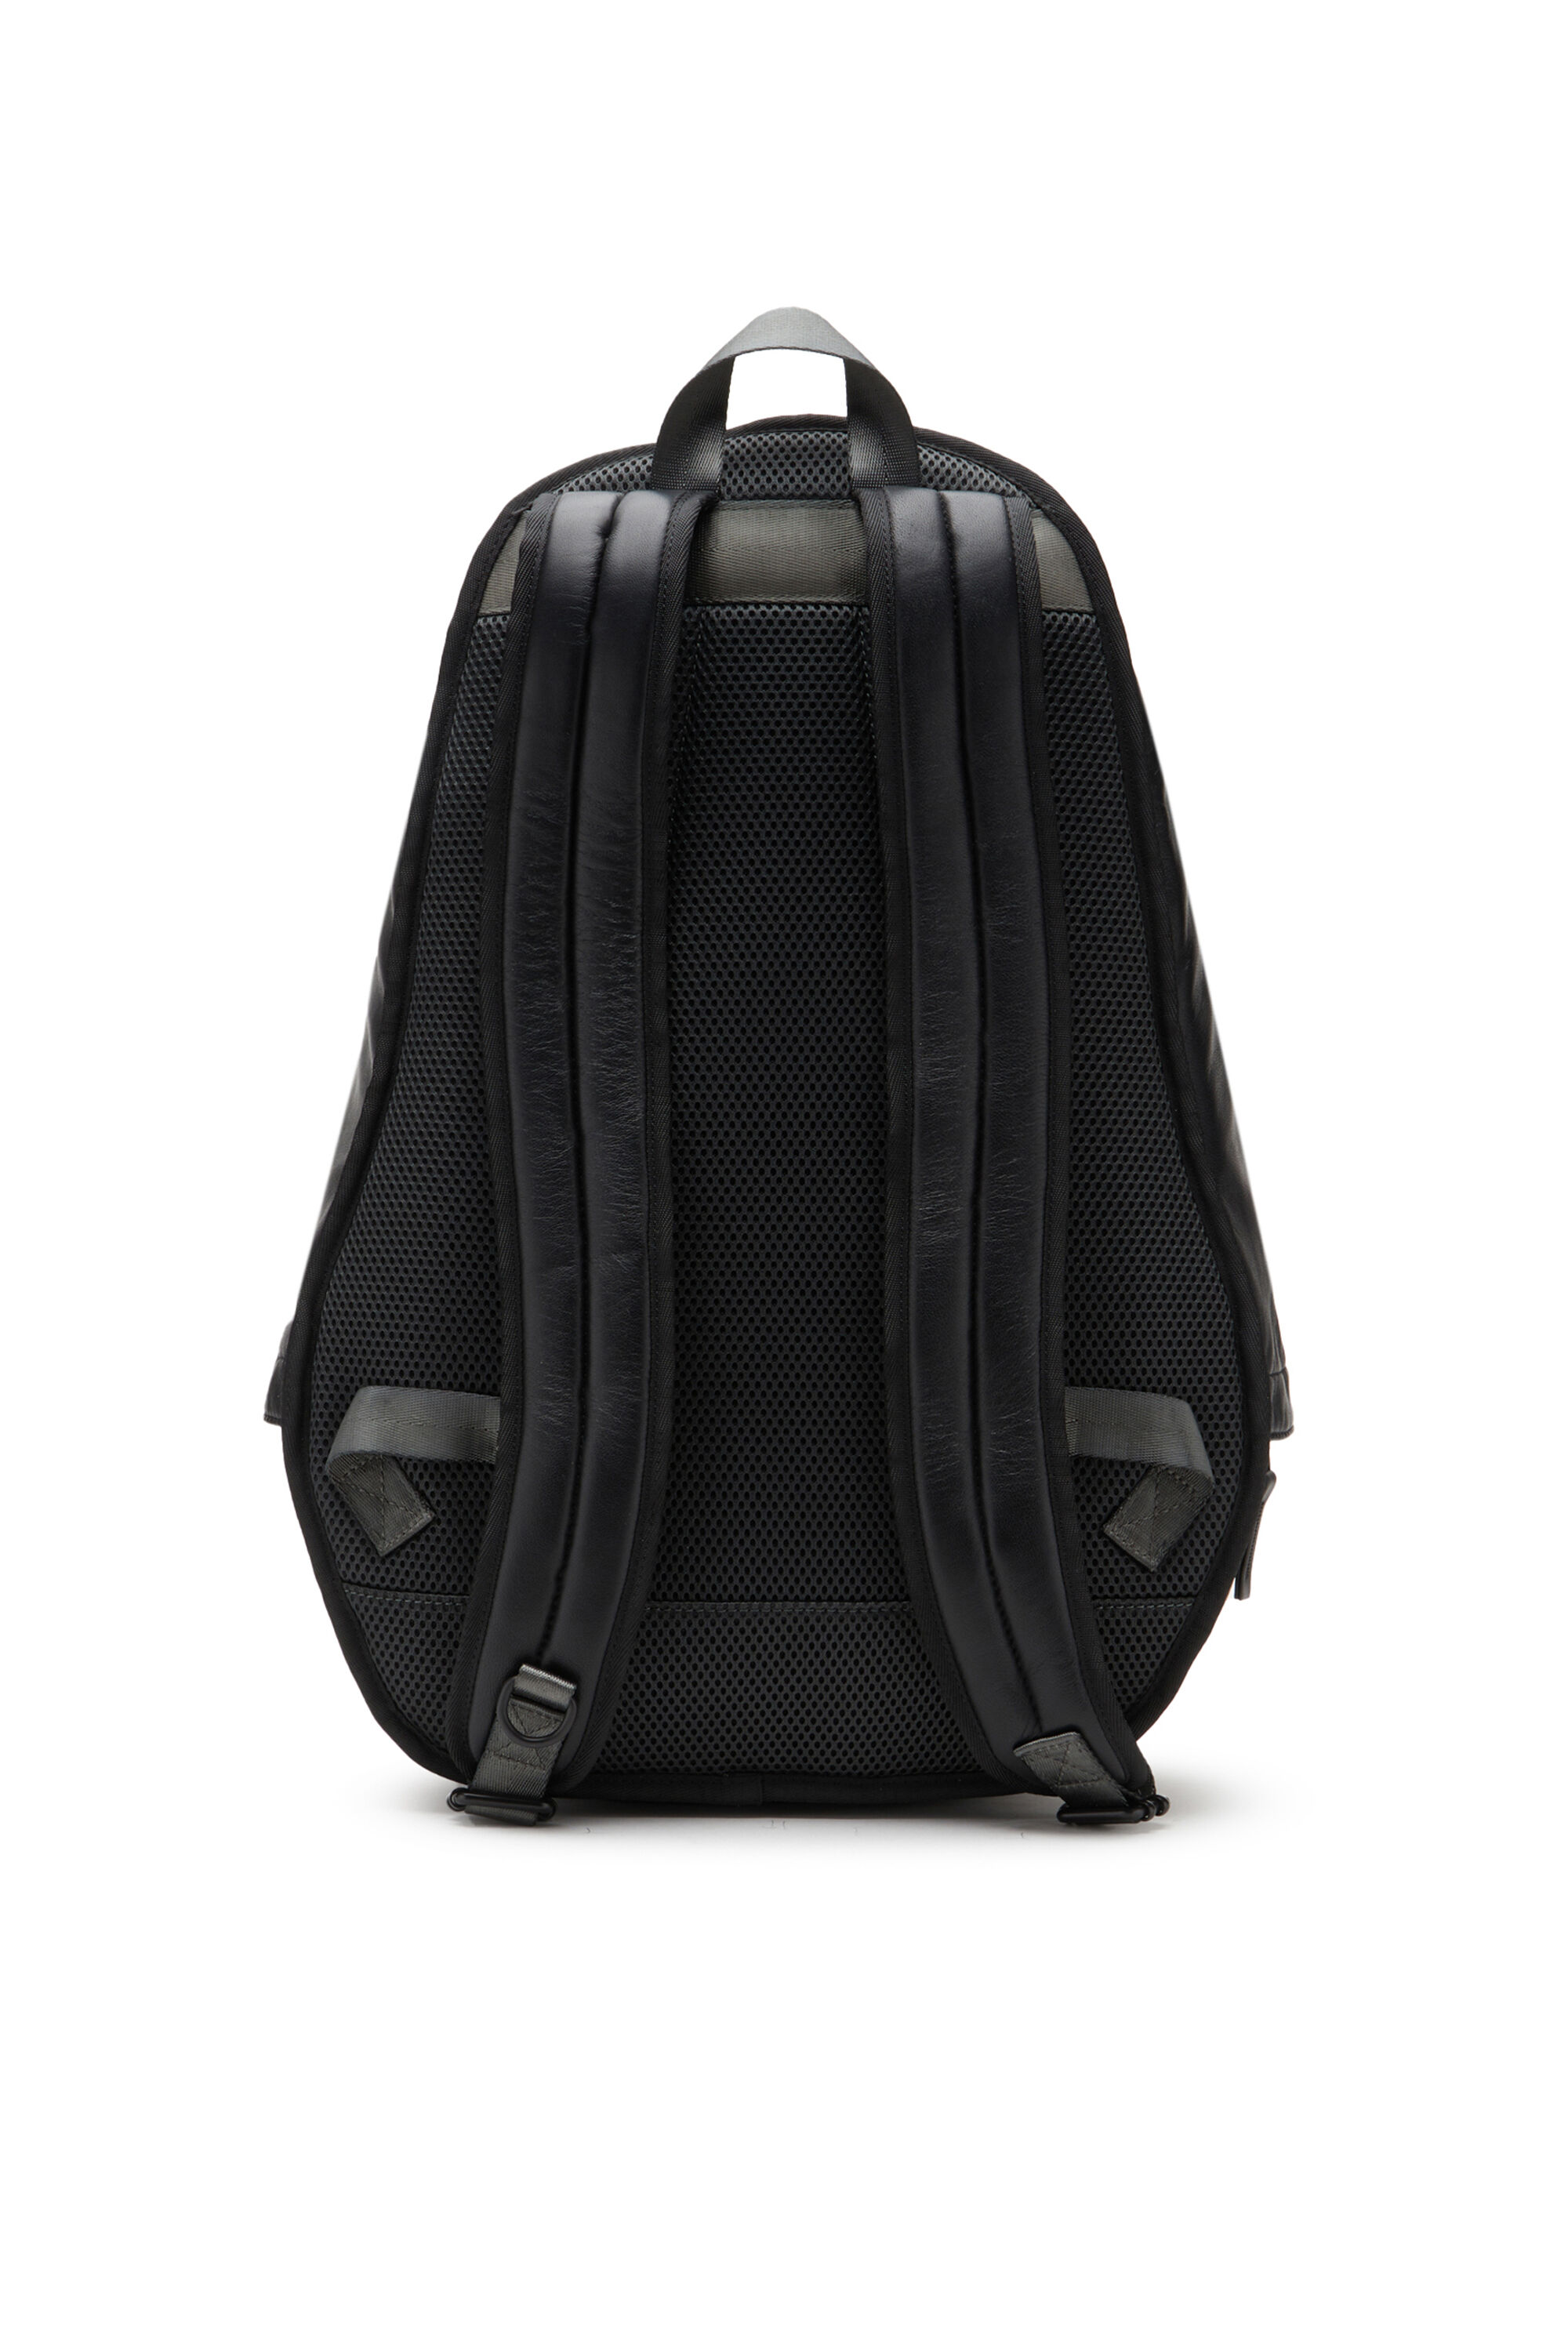 RAVE BACKPACK X : Backpack in nappa leather | Diesel